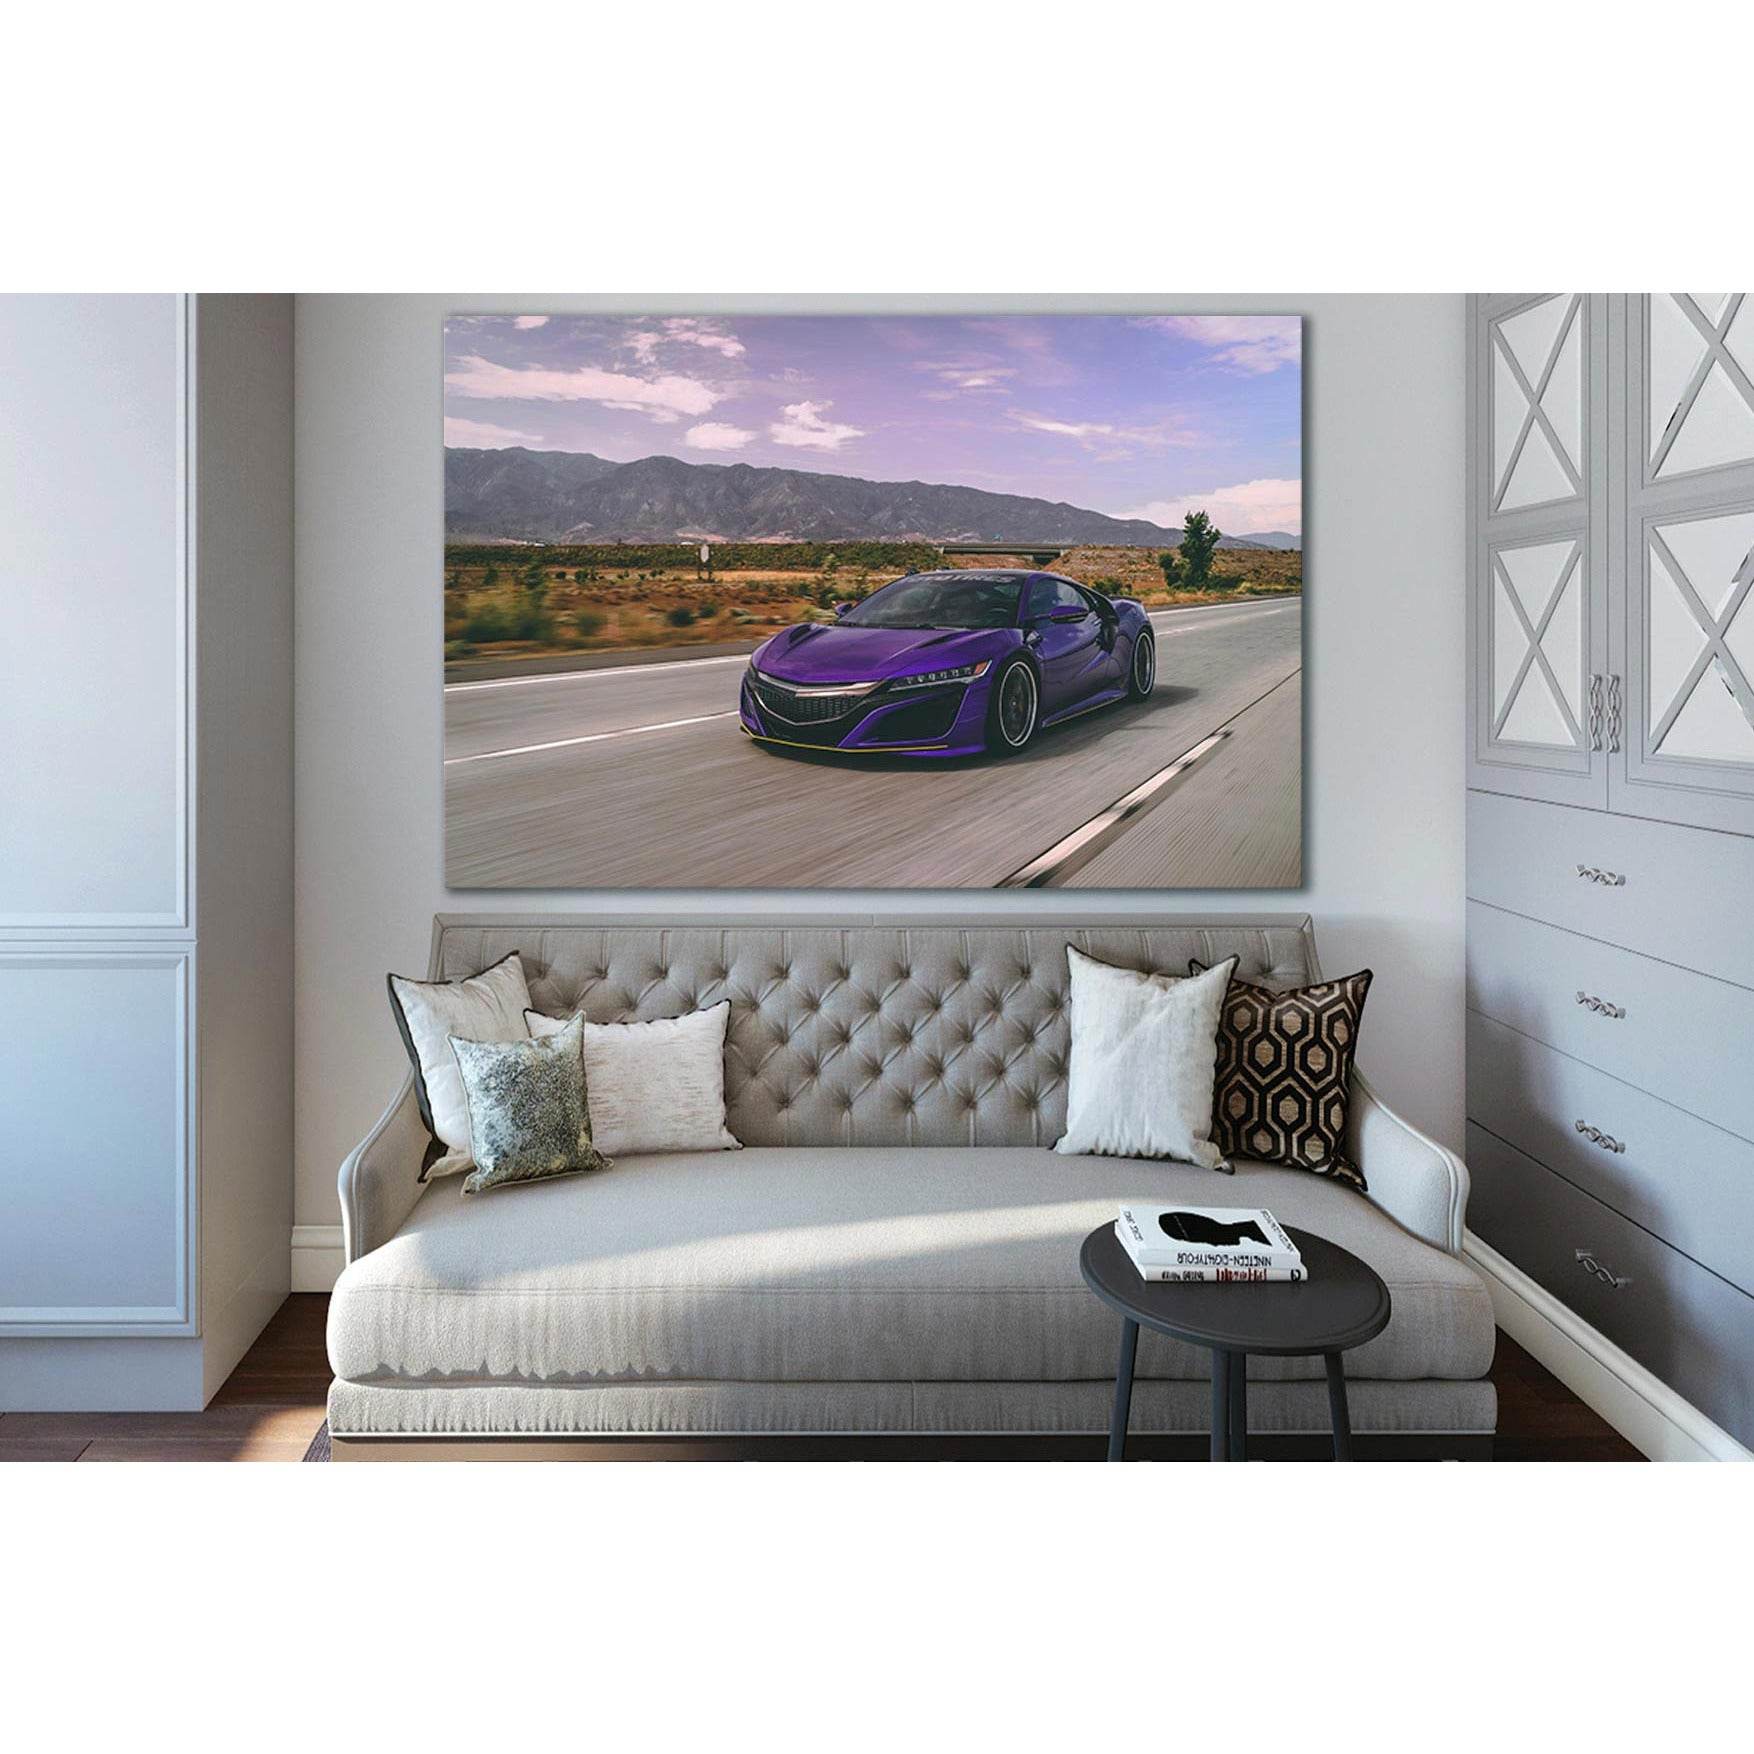 View Of The Sports Car On Highway №SL1447 Ready to Hang Canvas Print